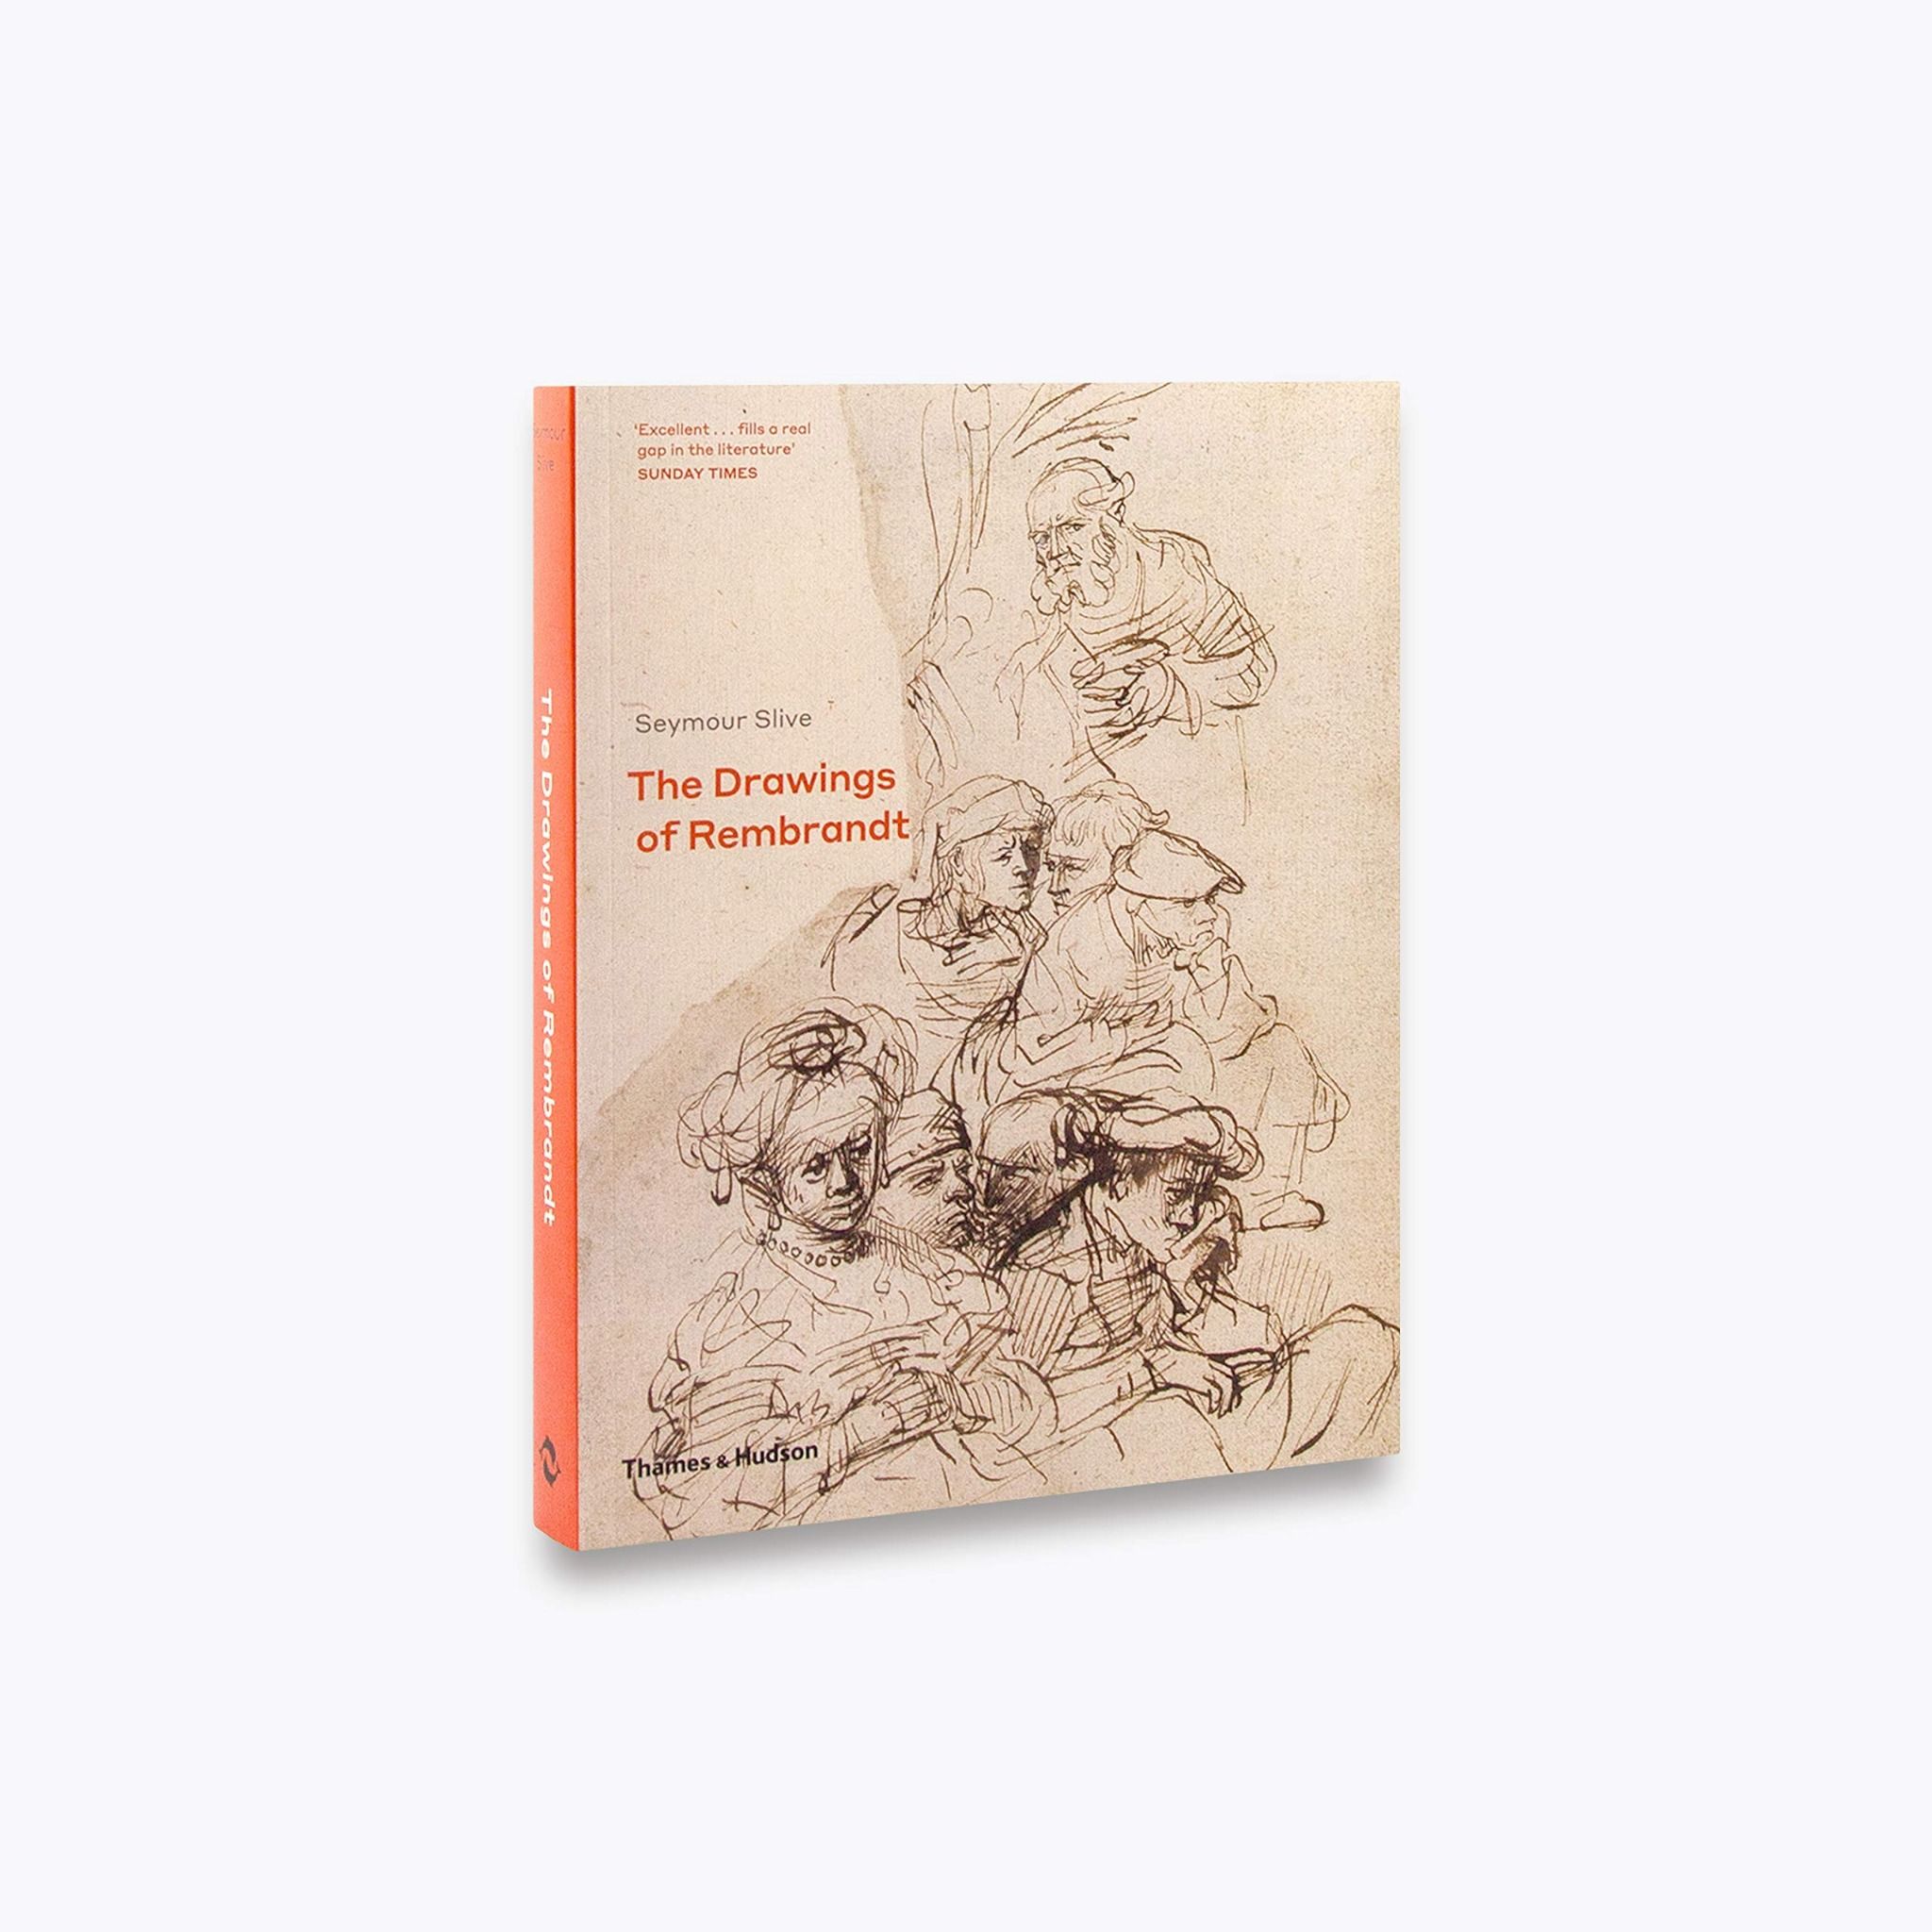  The Drawings of Rembrandt_Seymour Silve_9780500295359_Thames & Hudson Ltd 